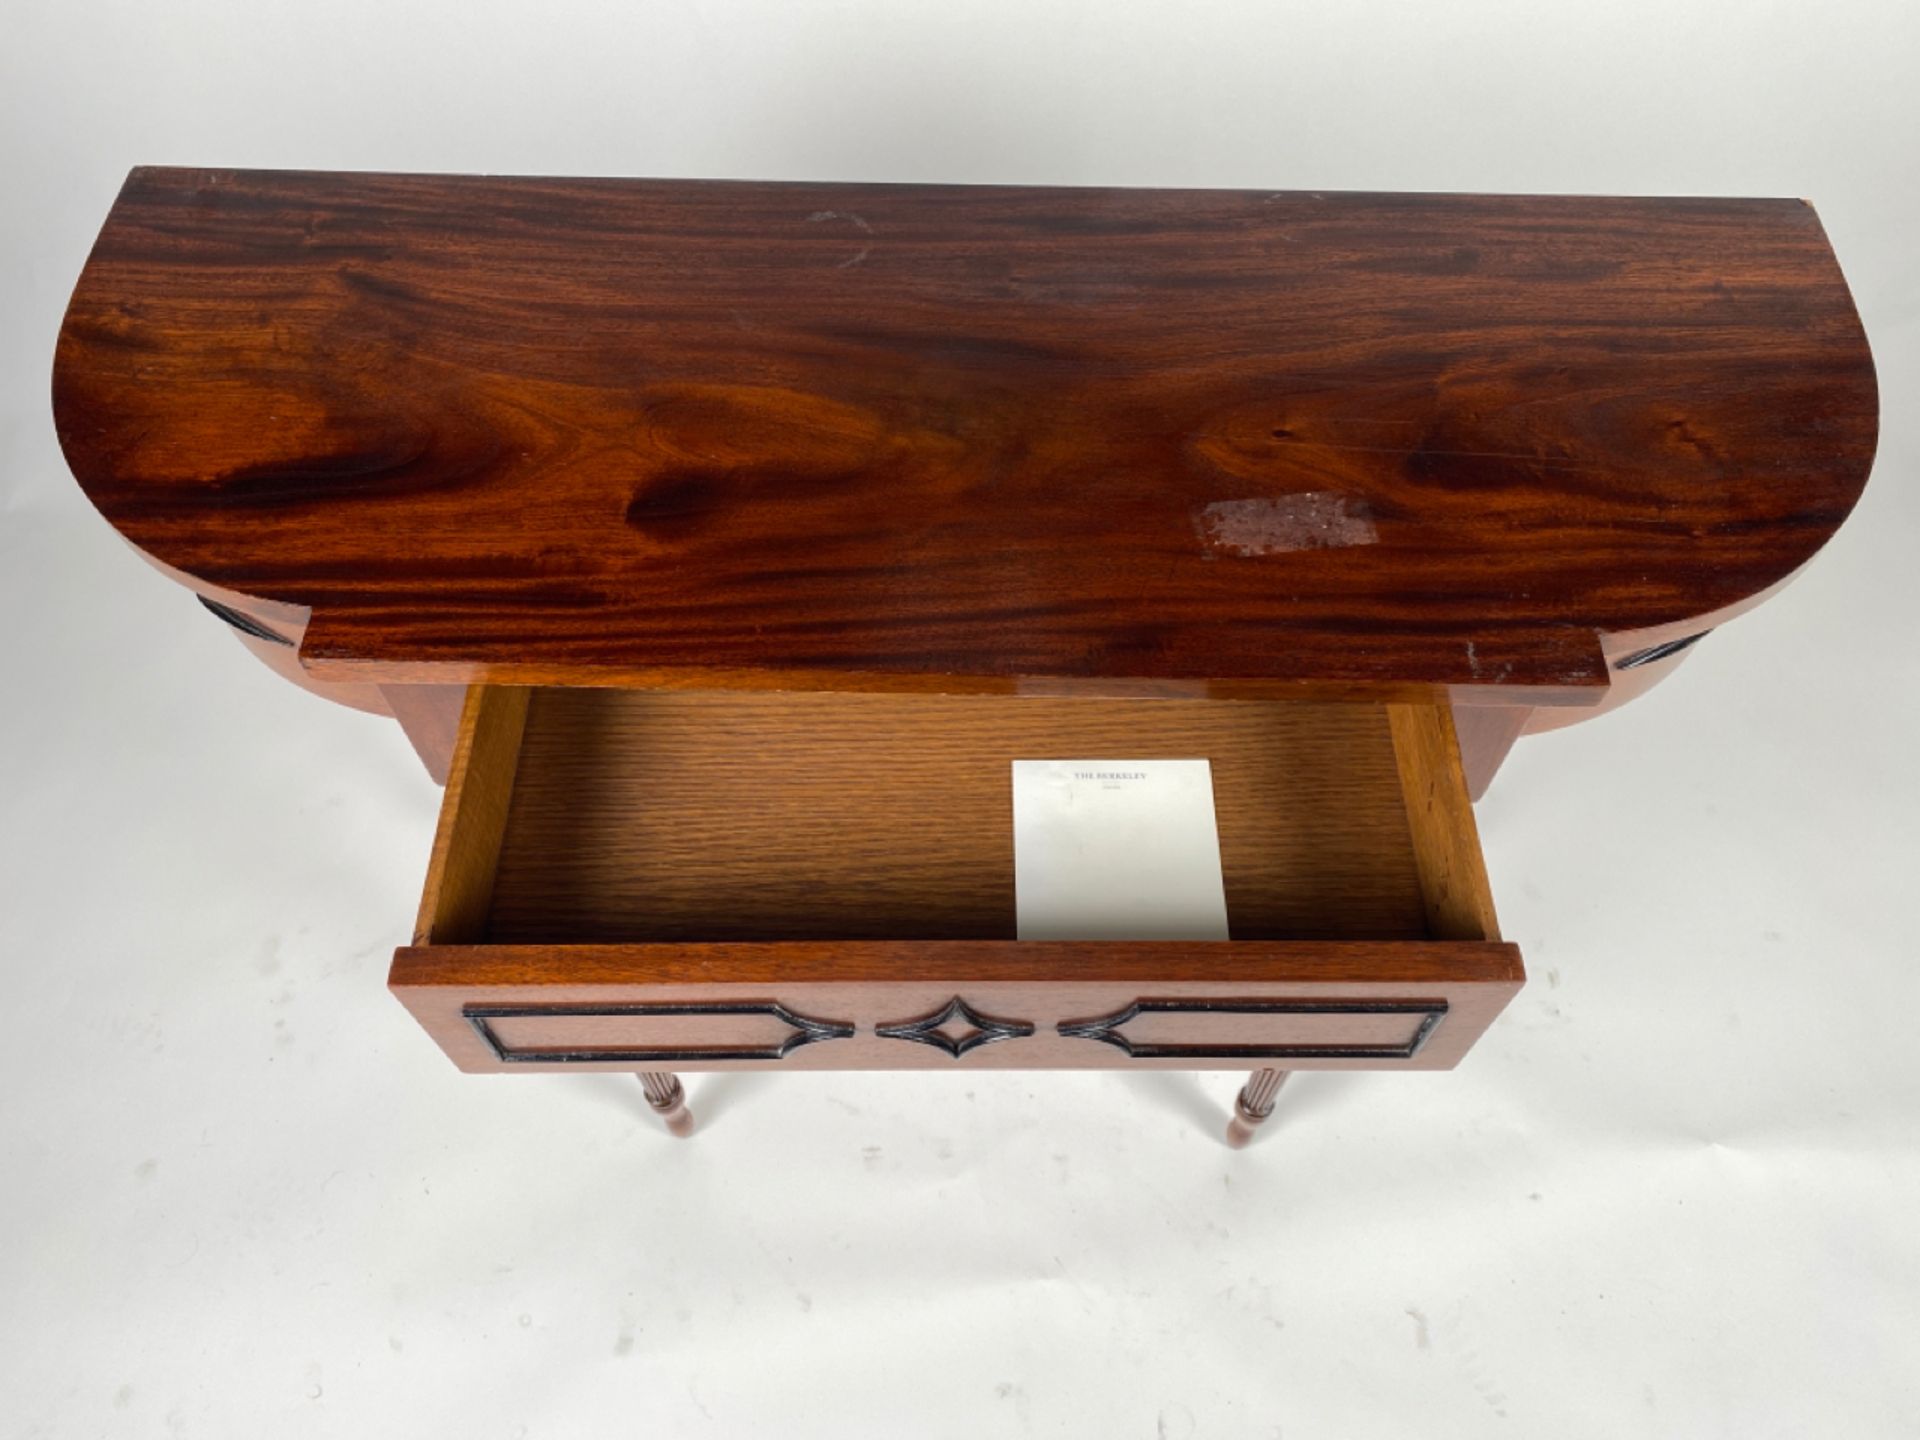 Antique Mahogany Console Table - Image 3 of 4